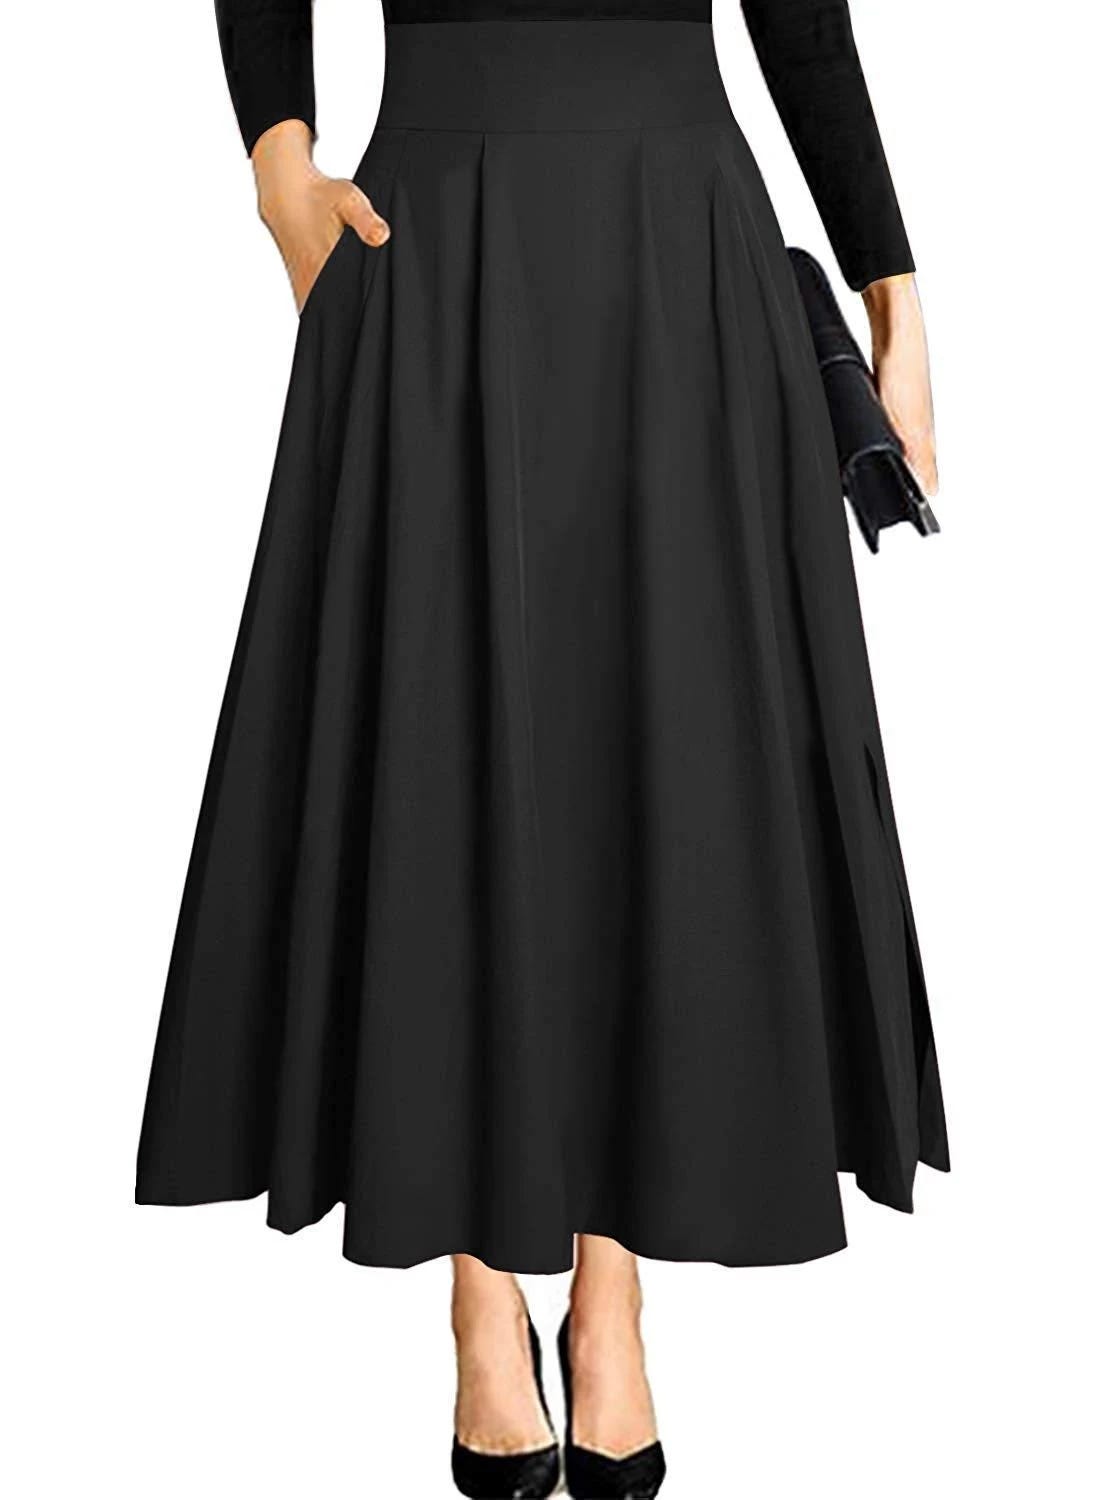 High-Waisted Pleated Maxi Skirt for Women - Versatile and Comfortable | Image